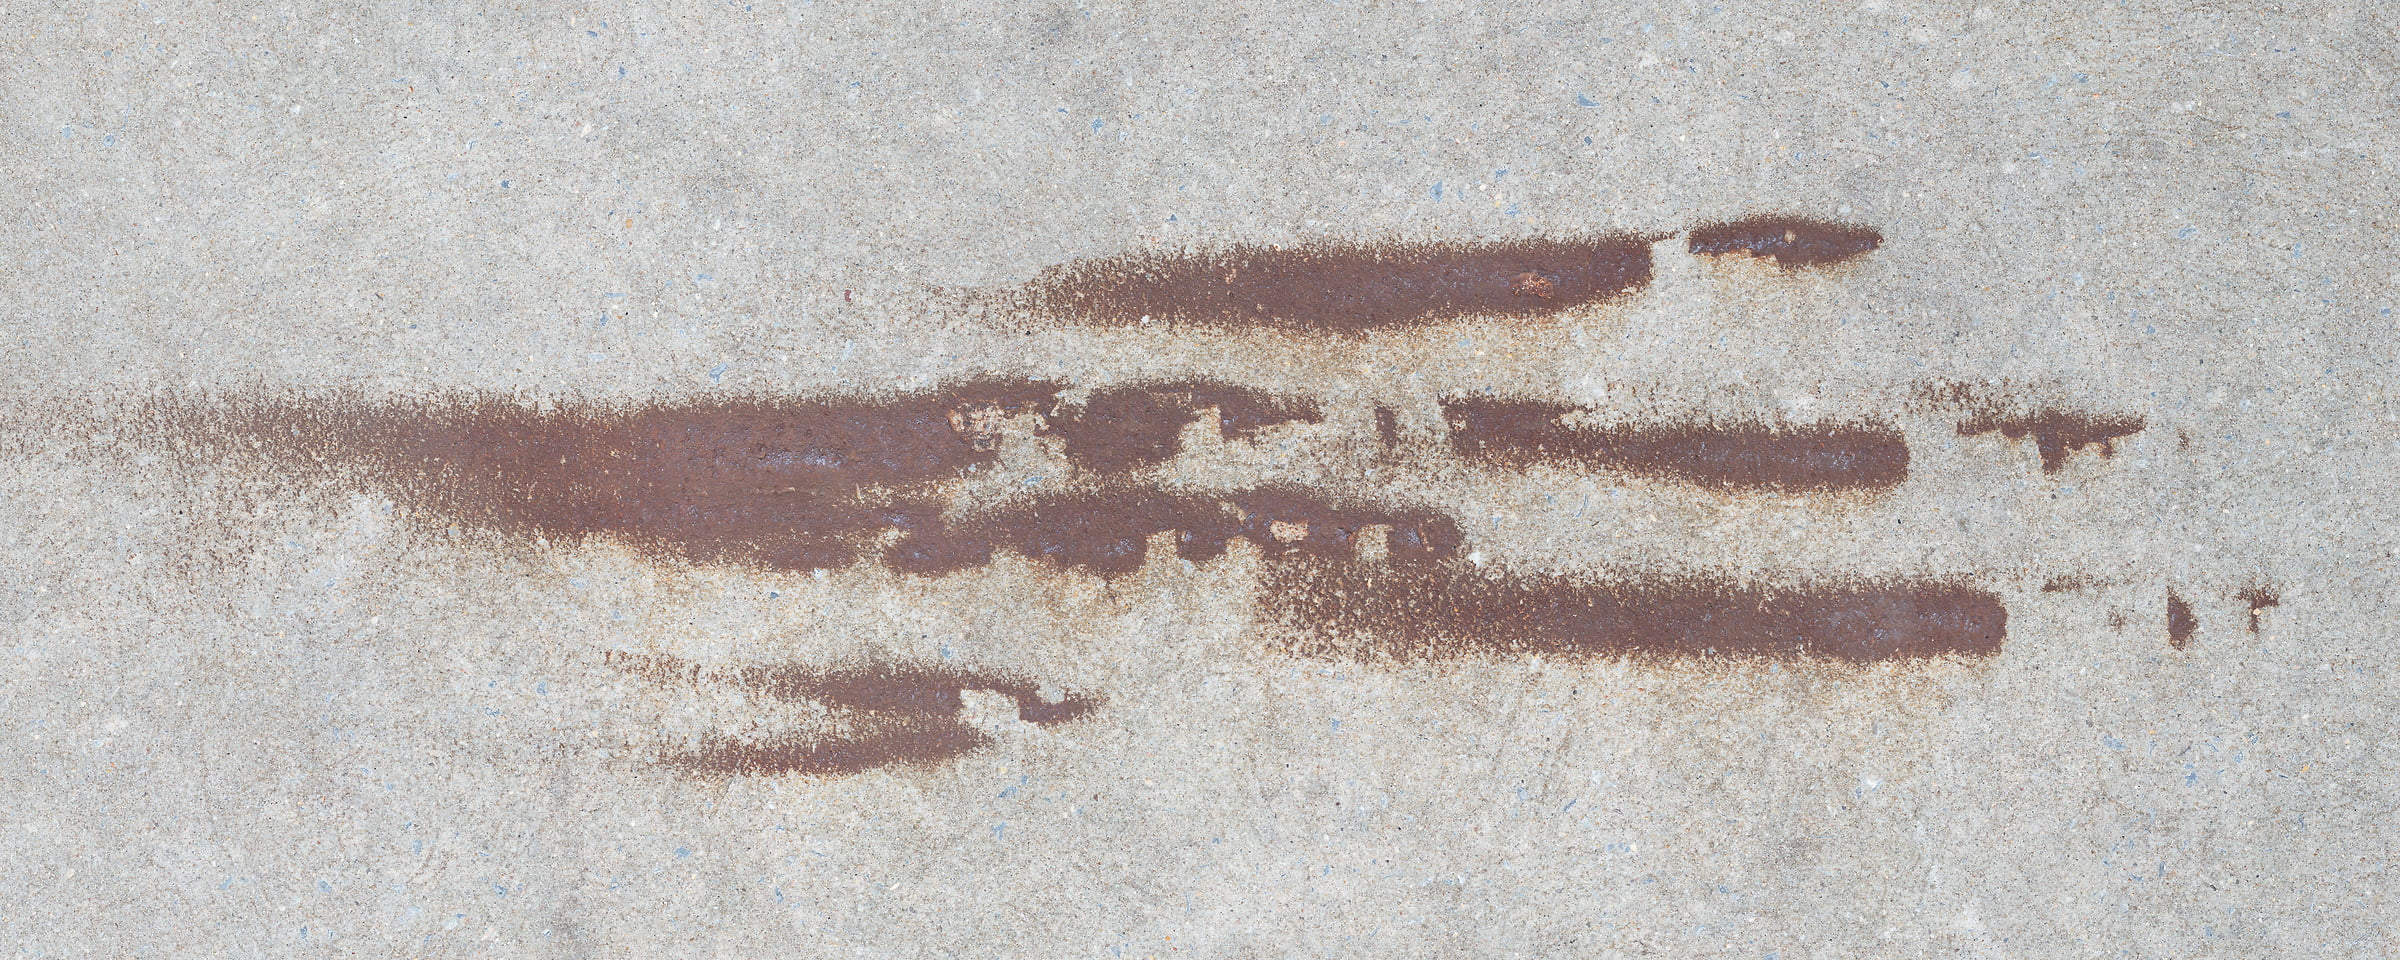 771 megapixels! A very high resolution, large-format VAST photo print of rust stains on sidewalks; fine art photograph created by Dan Piech in Manhattan, New York City.